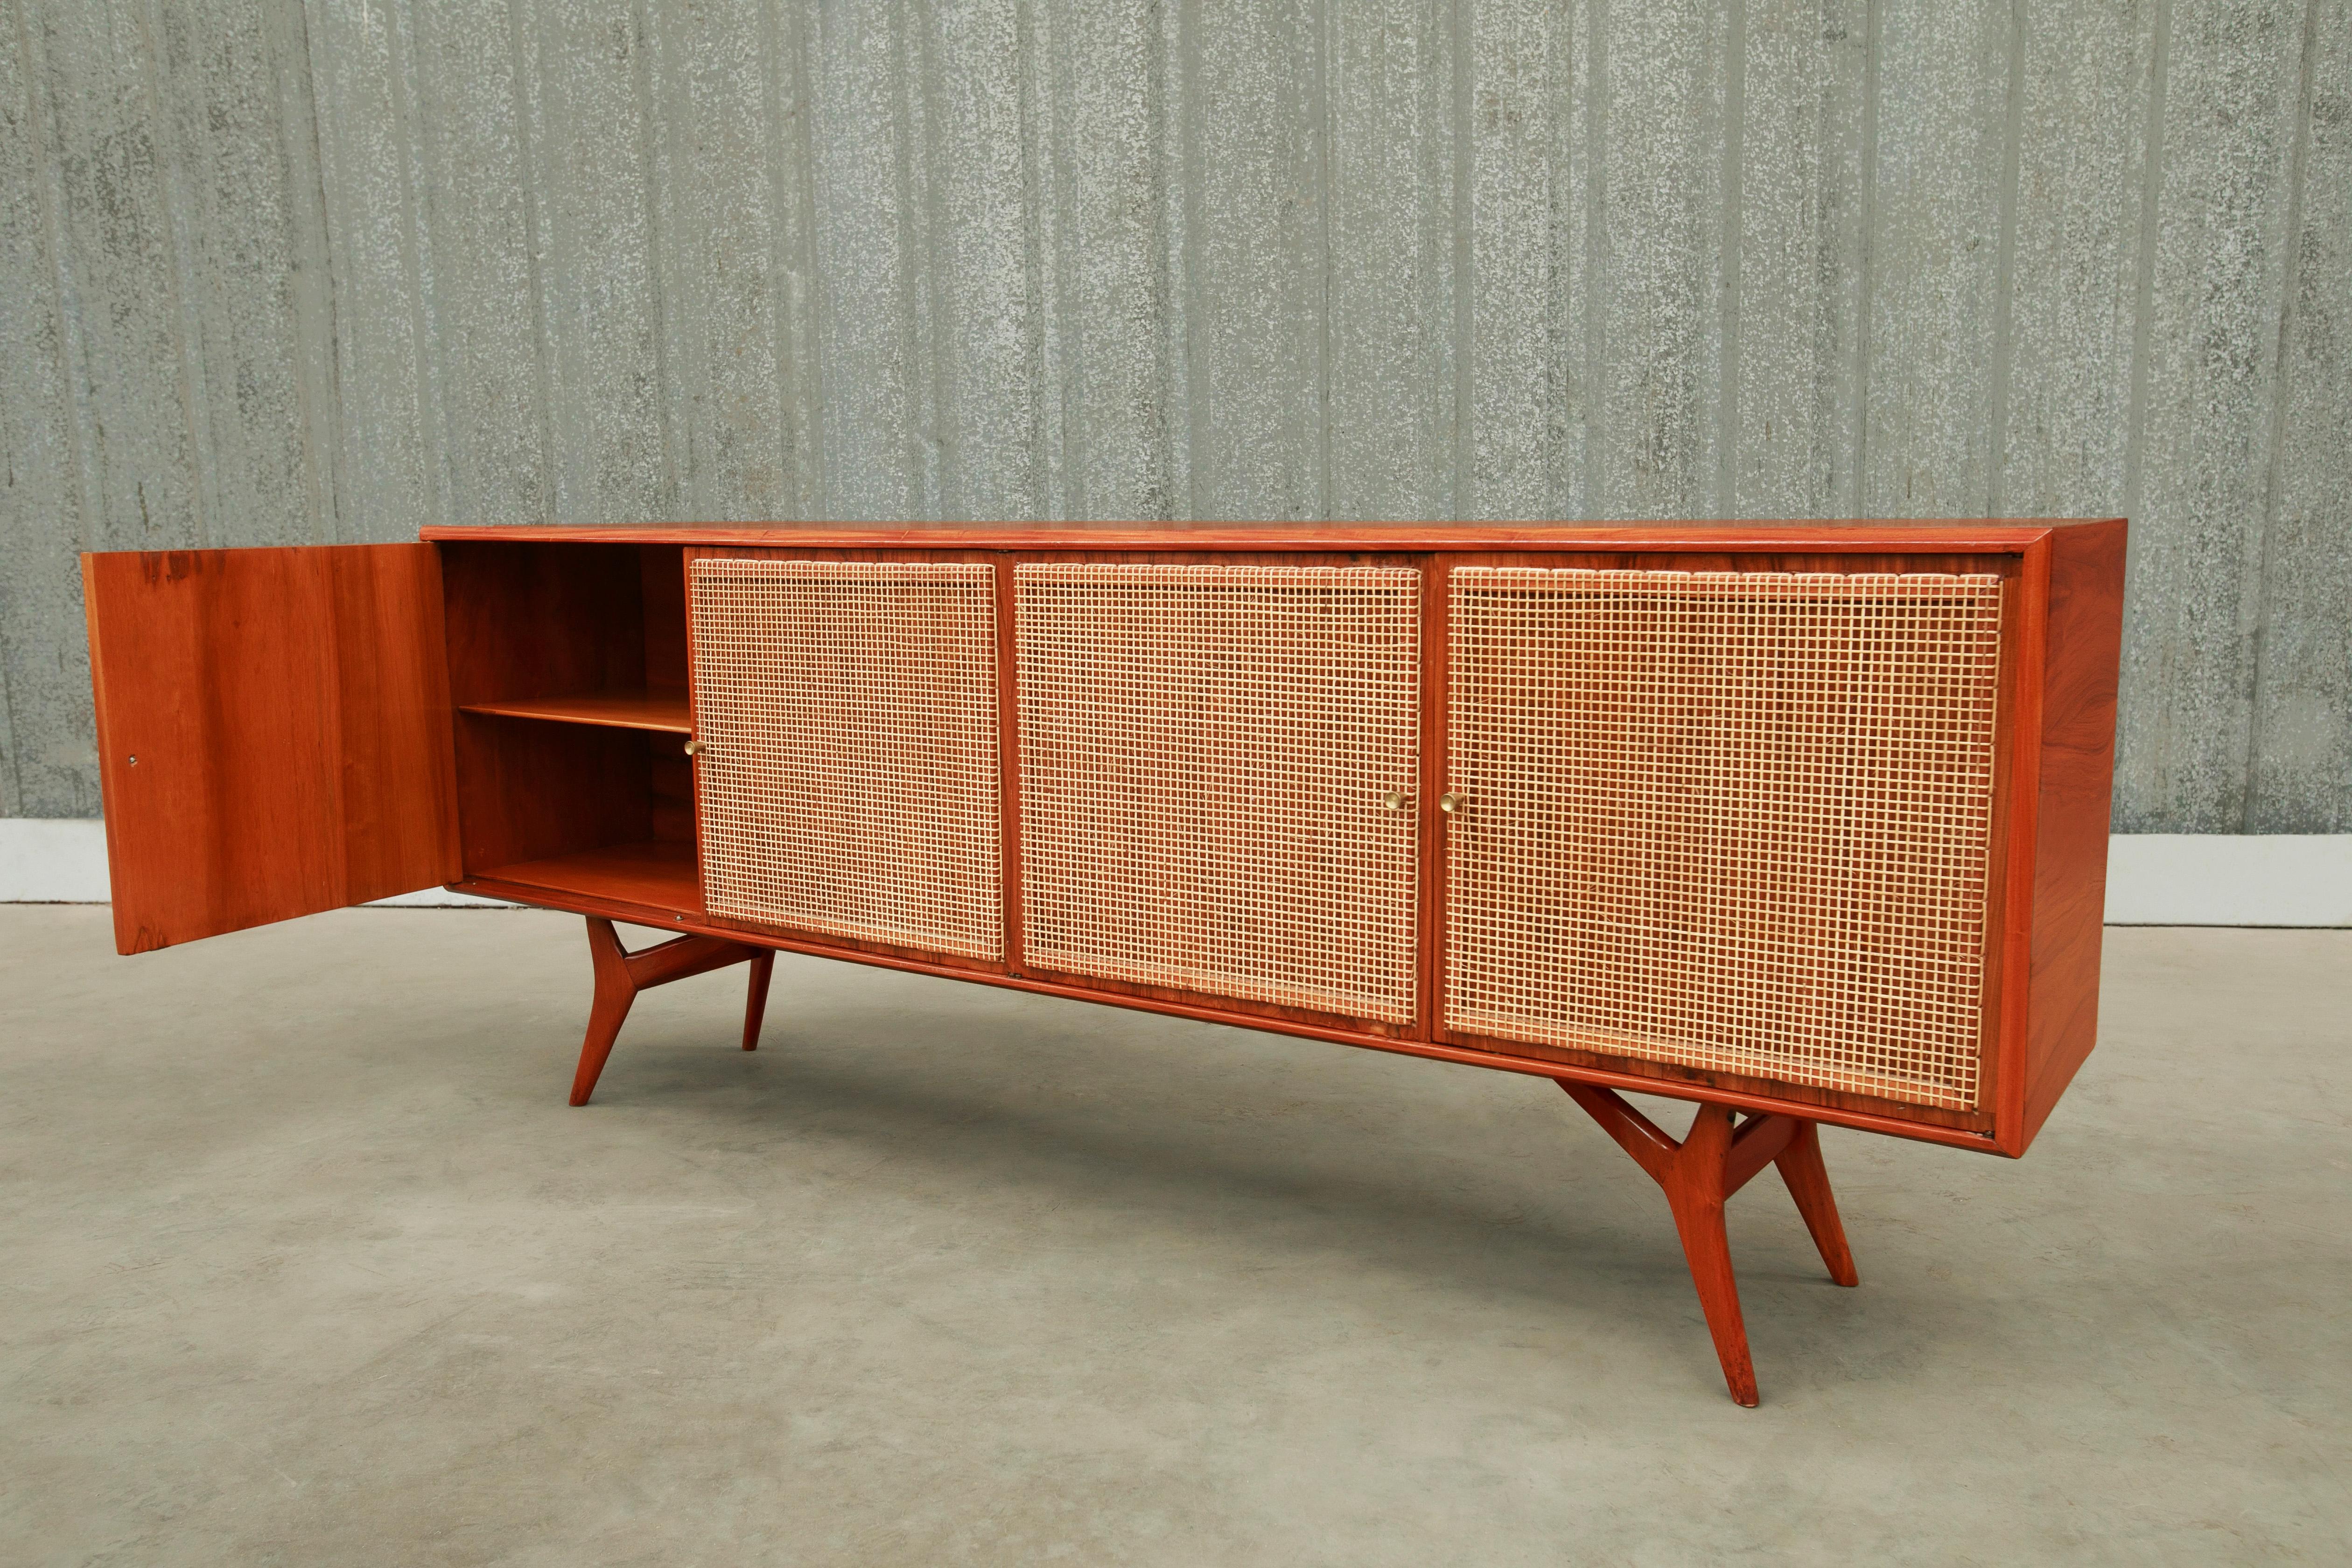 Woodwork 1950s Brazilian Modern Credenza in Hardwood & Caning by Forma